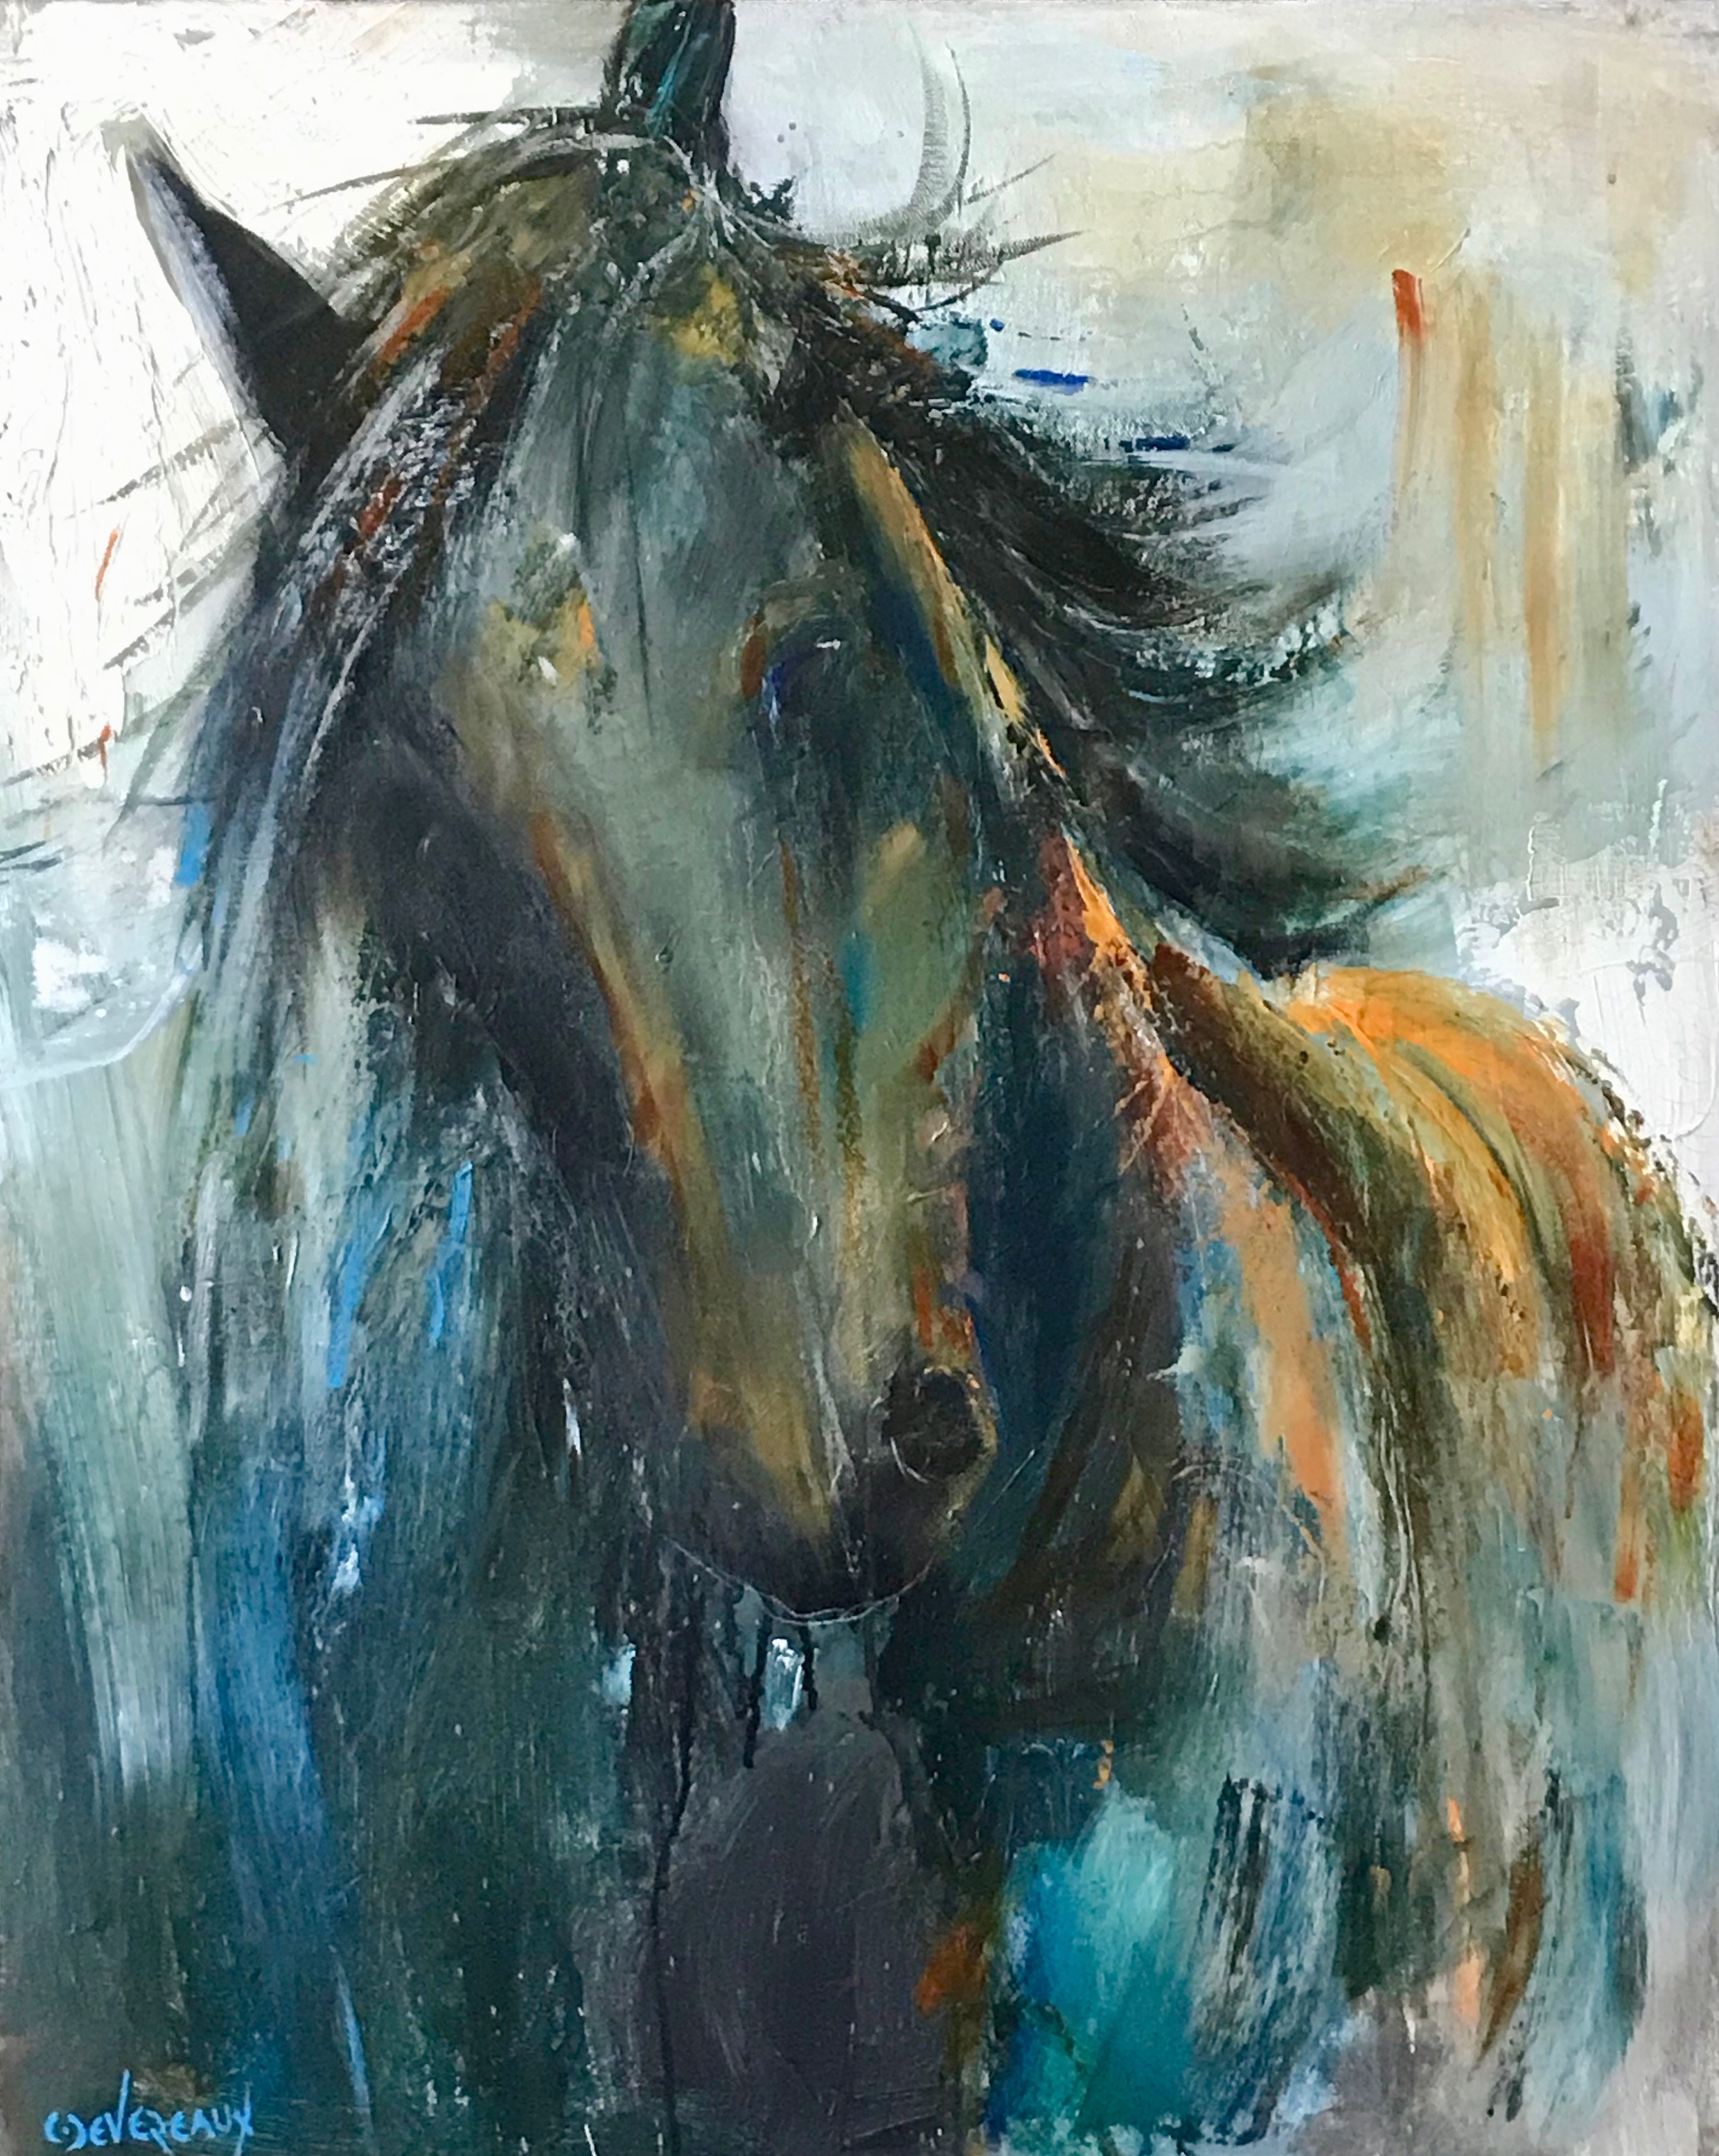 ‘Splash’ 24×30 in  contemporary modern equine, horse painting by Cher Devereaux on stretched canvas.